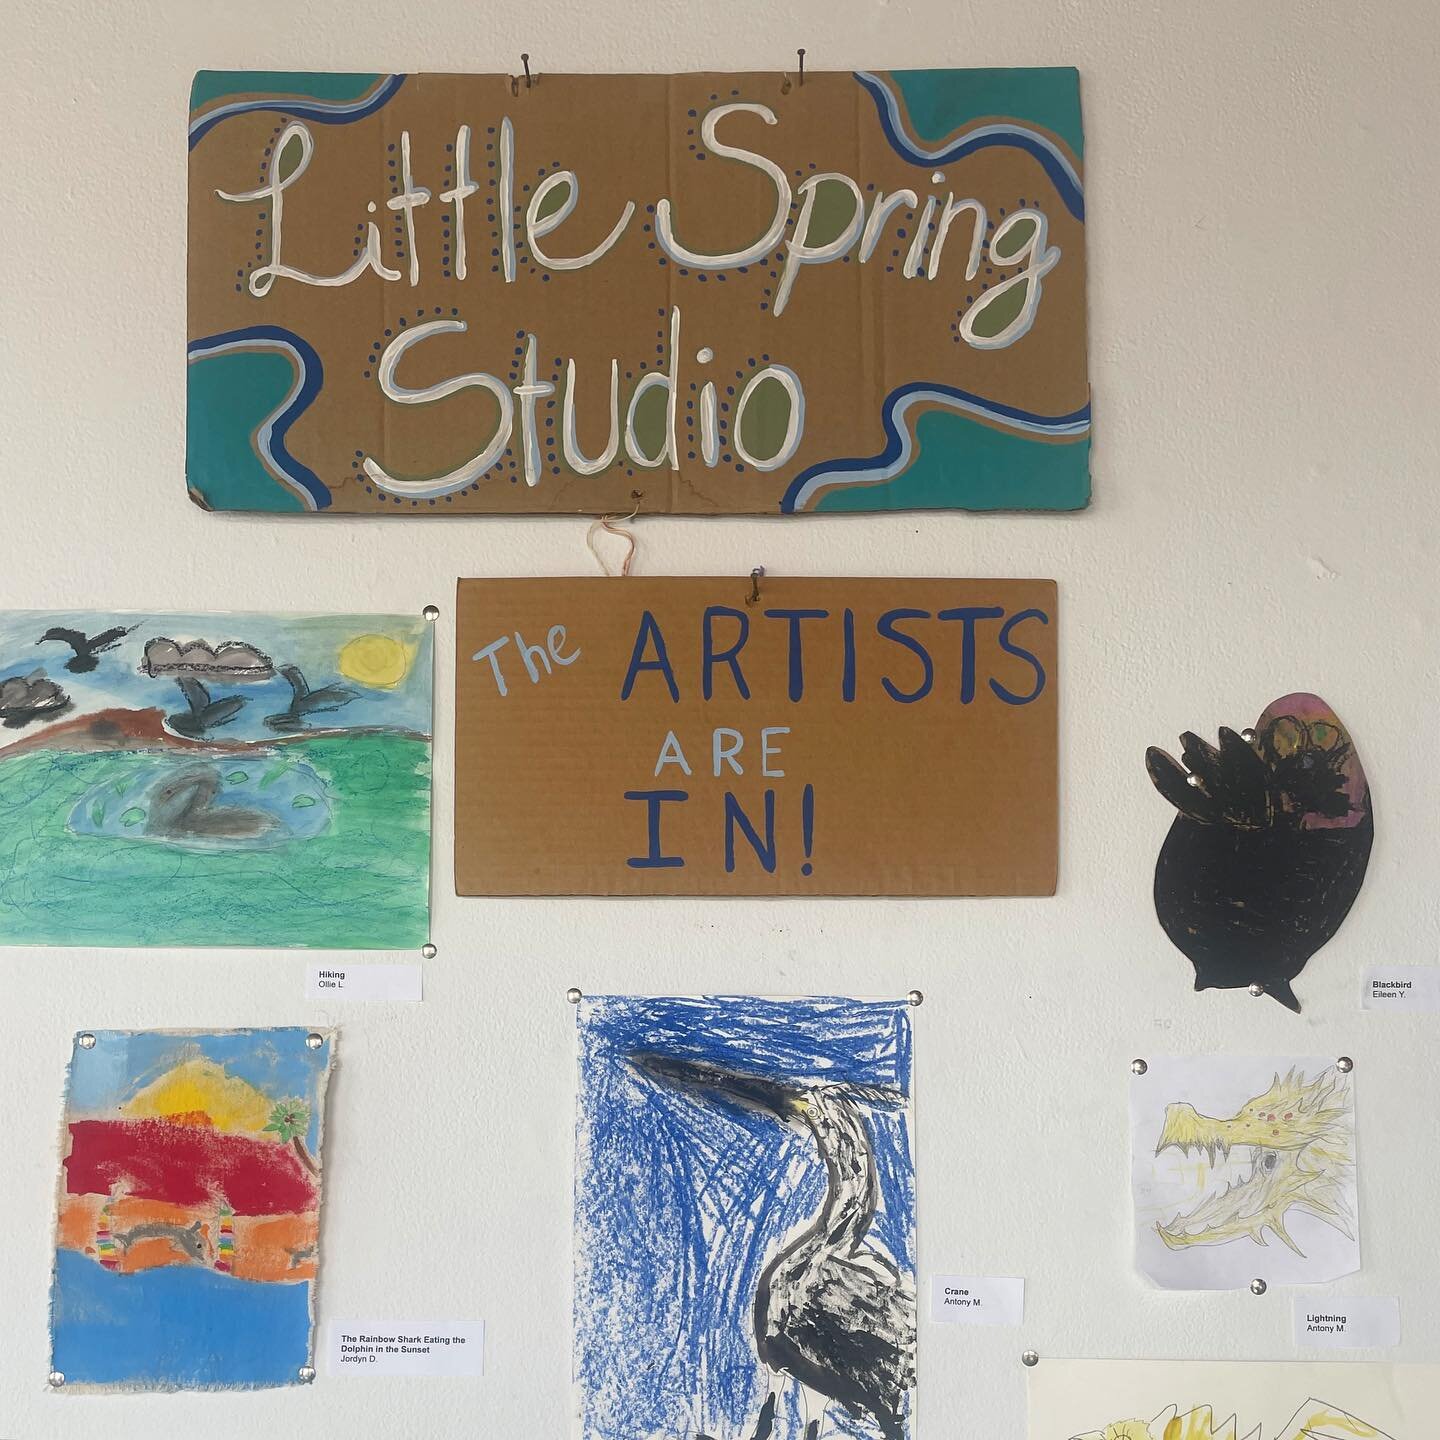 An exhibition of art by Little Spring students is currently on display for the month of July @rainbowbakery 🎨 🌈 🍪 

Swipe to see more work ➡️ Or, better yet, head over to see it in person + grab a treat!

#bloomingtonindiana 
#visitbloomington 
#k